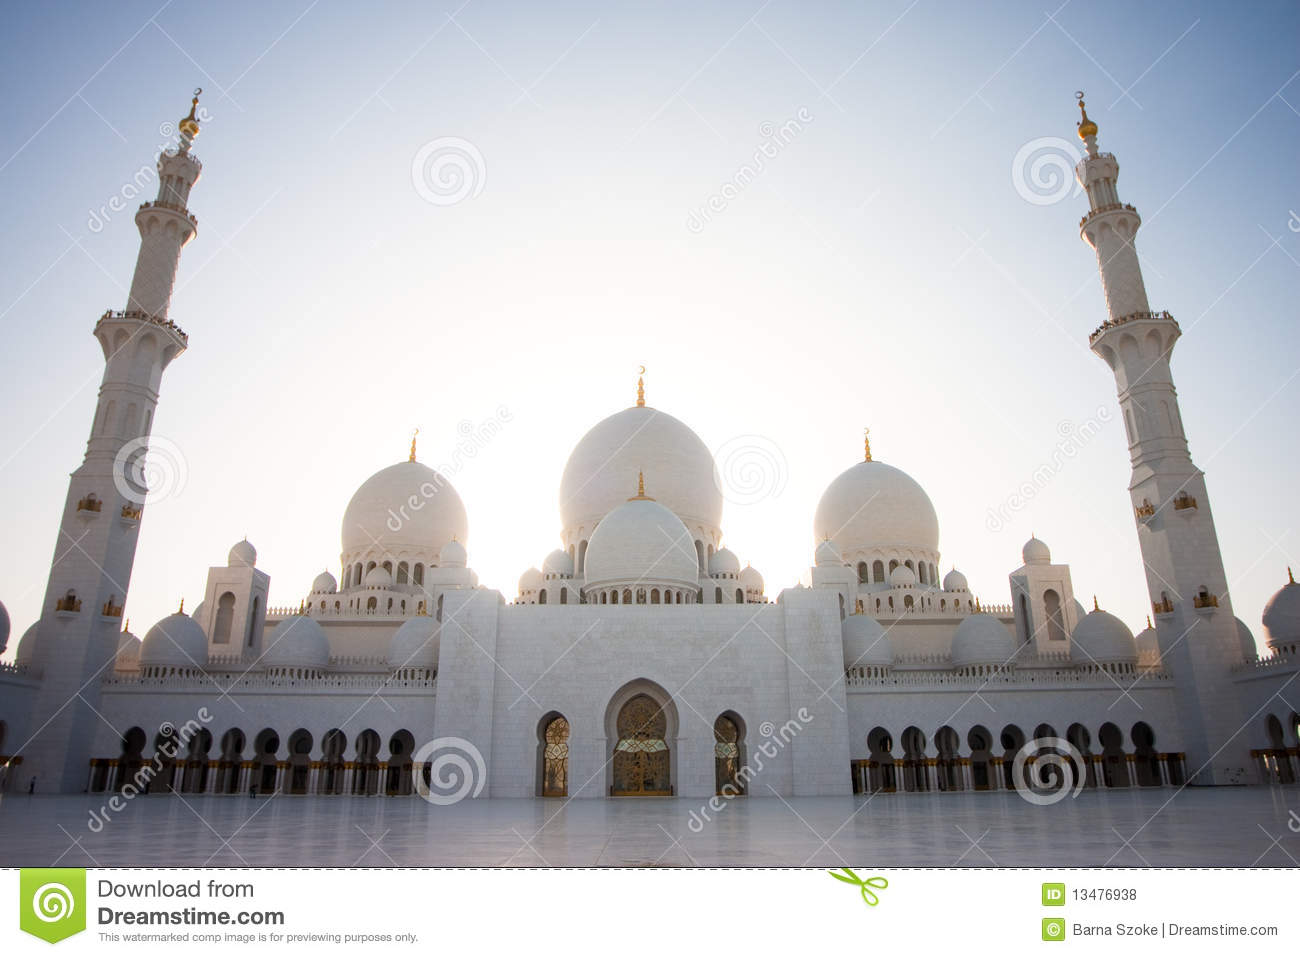 Sheikh Zayed Mosque Abu Dhabi Stock Photos, Images, & Pictures.